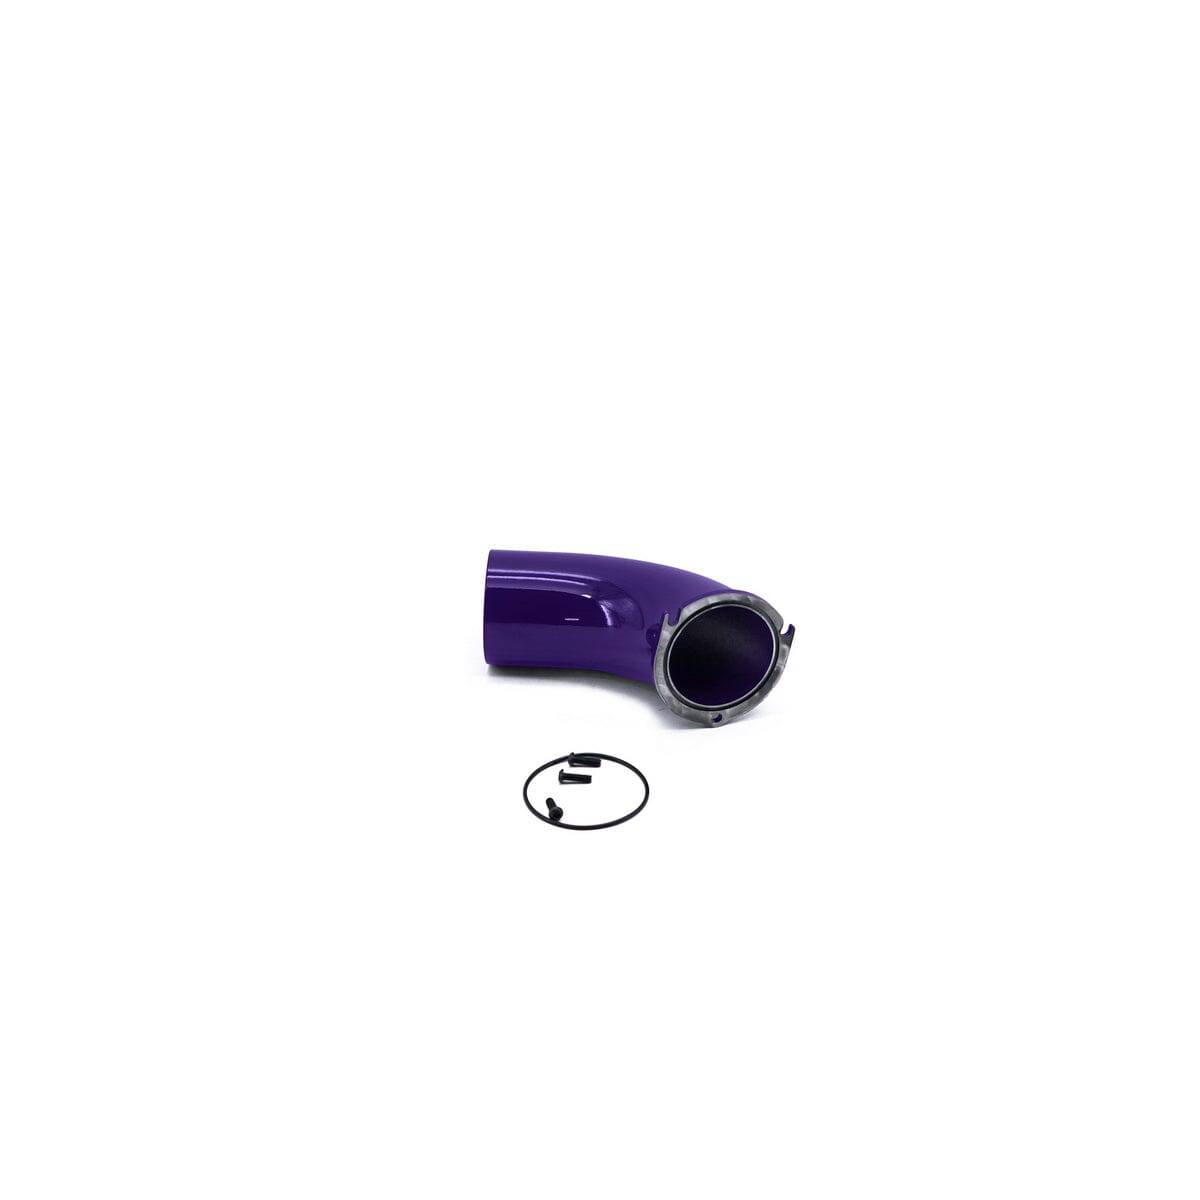 HSP Stock Turbo Inlet Horn (2001-2004 Chevrolet / GMC) Turbocharger Mounting Kit HSP Diesel Candy Purple 